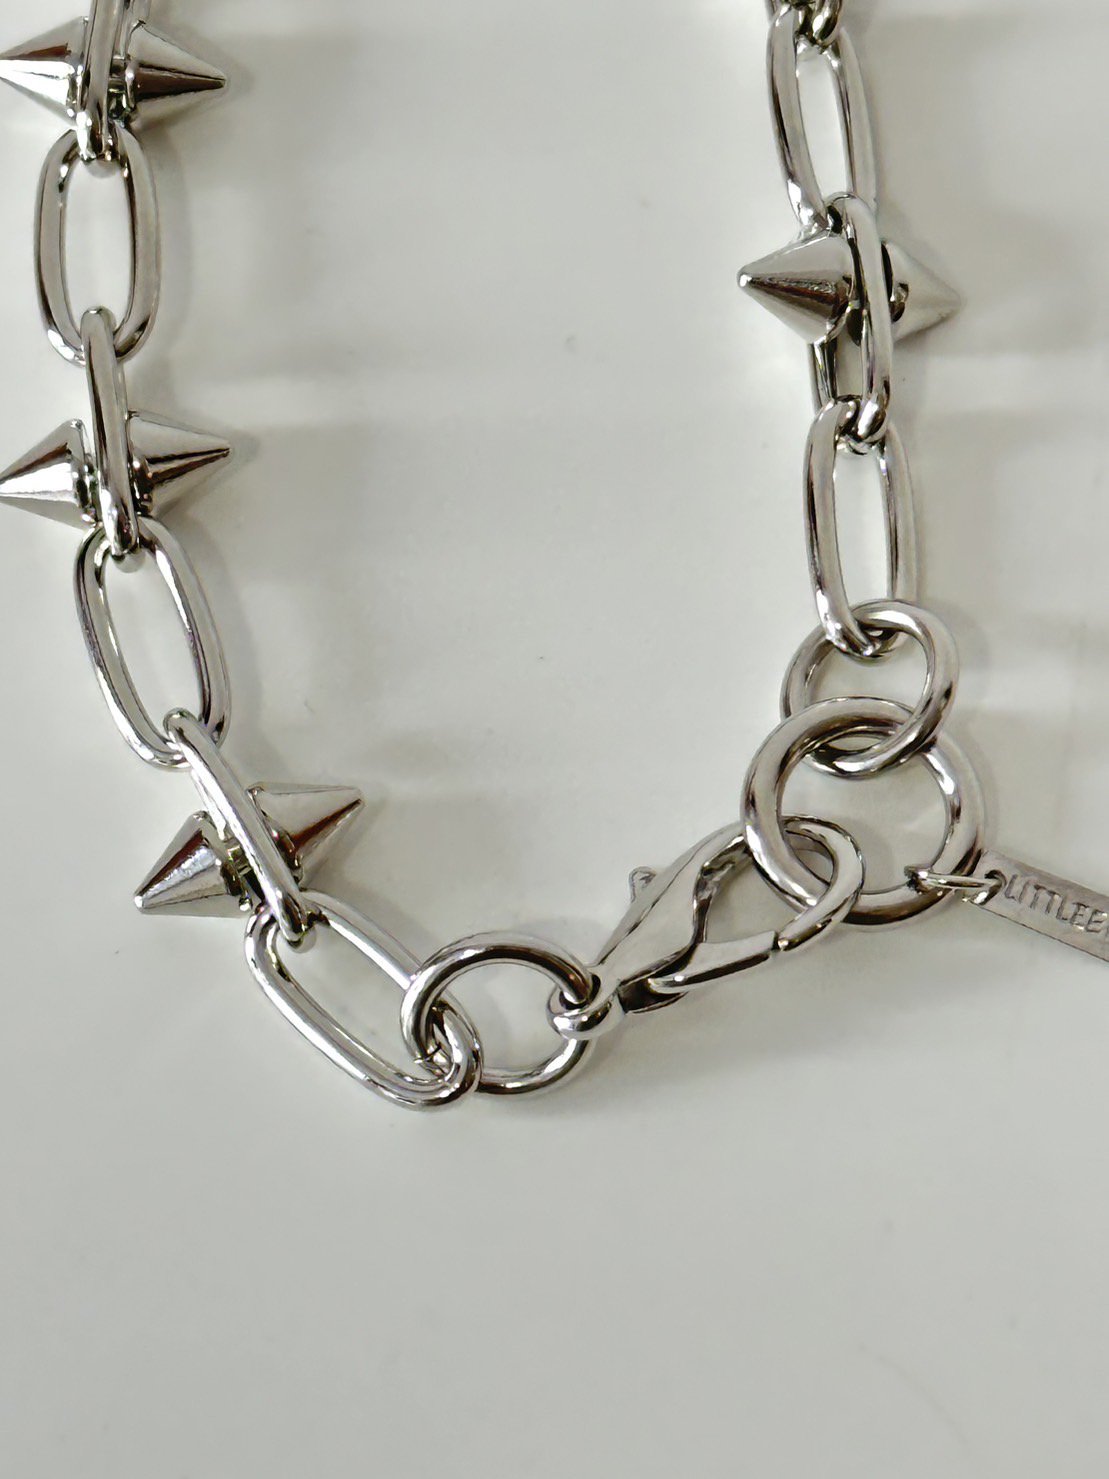 LITTLEBIG<br />Studded Necklace / Silver<img class='new_mark_img2' src='https://img.shop-pro.jp/img/new/icons47.gif' style='border:none;display:inline;margin:0px;padding:0px;width:auto;' />